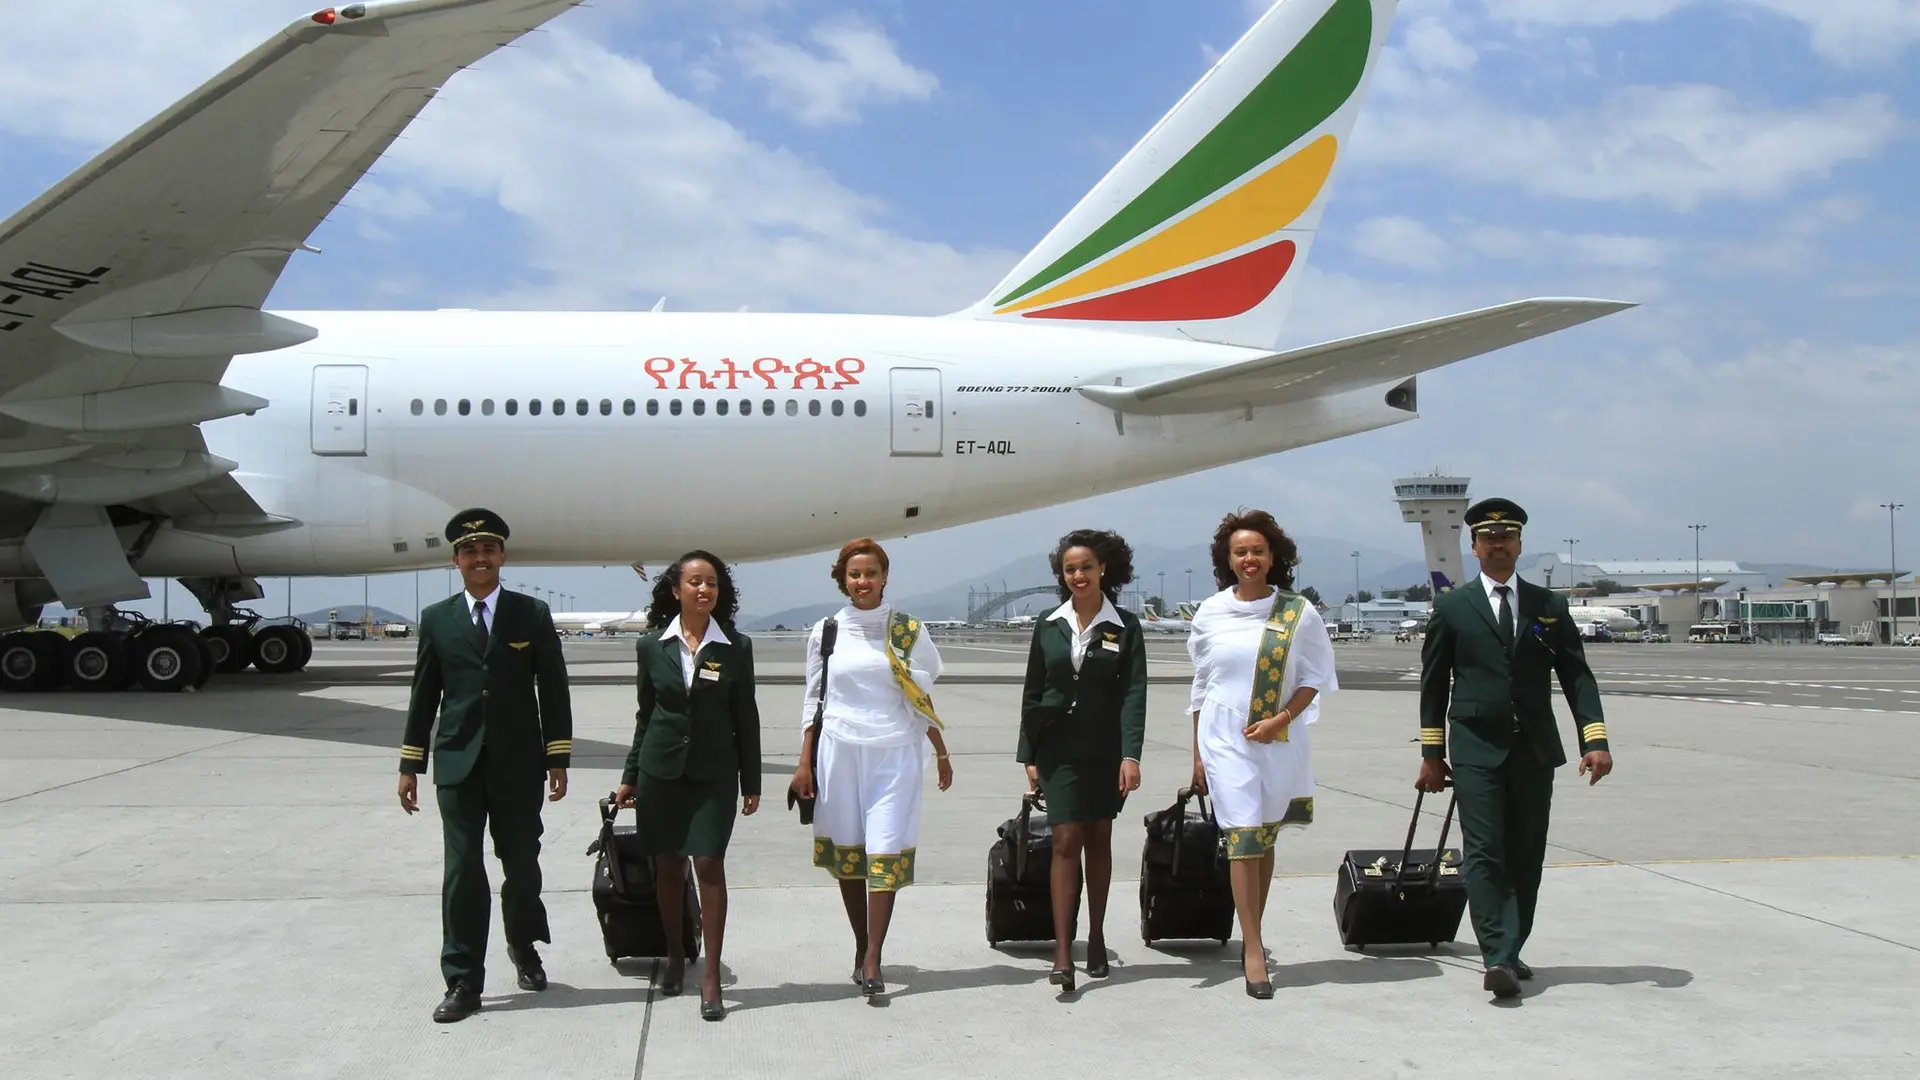 Airline review Service - Ethiopian Airlines - 4